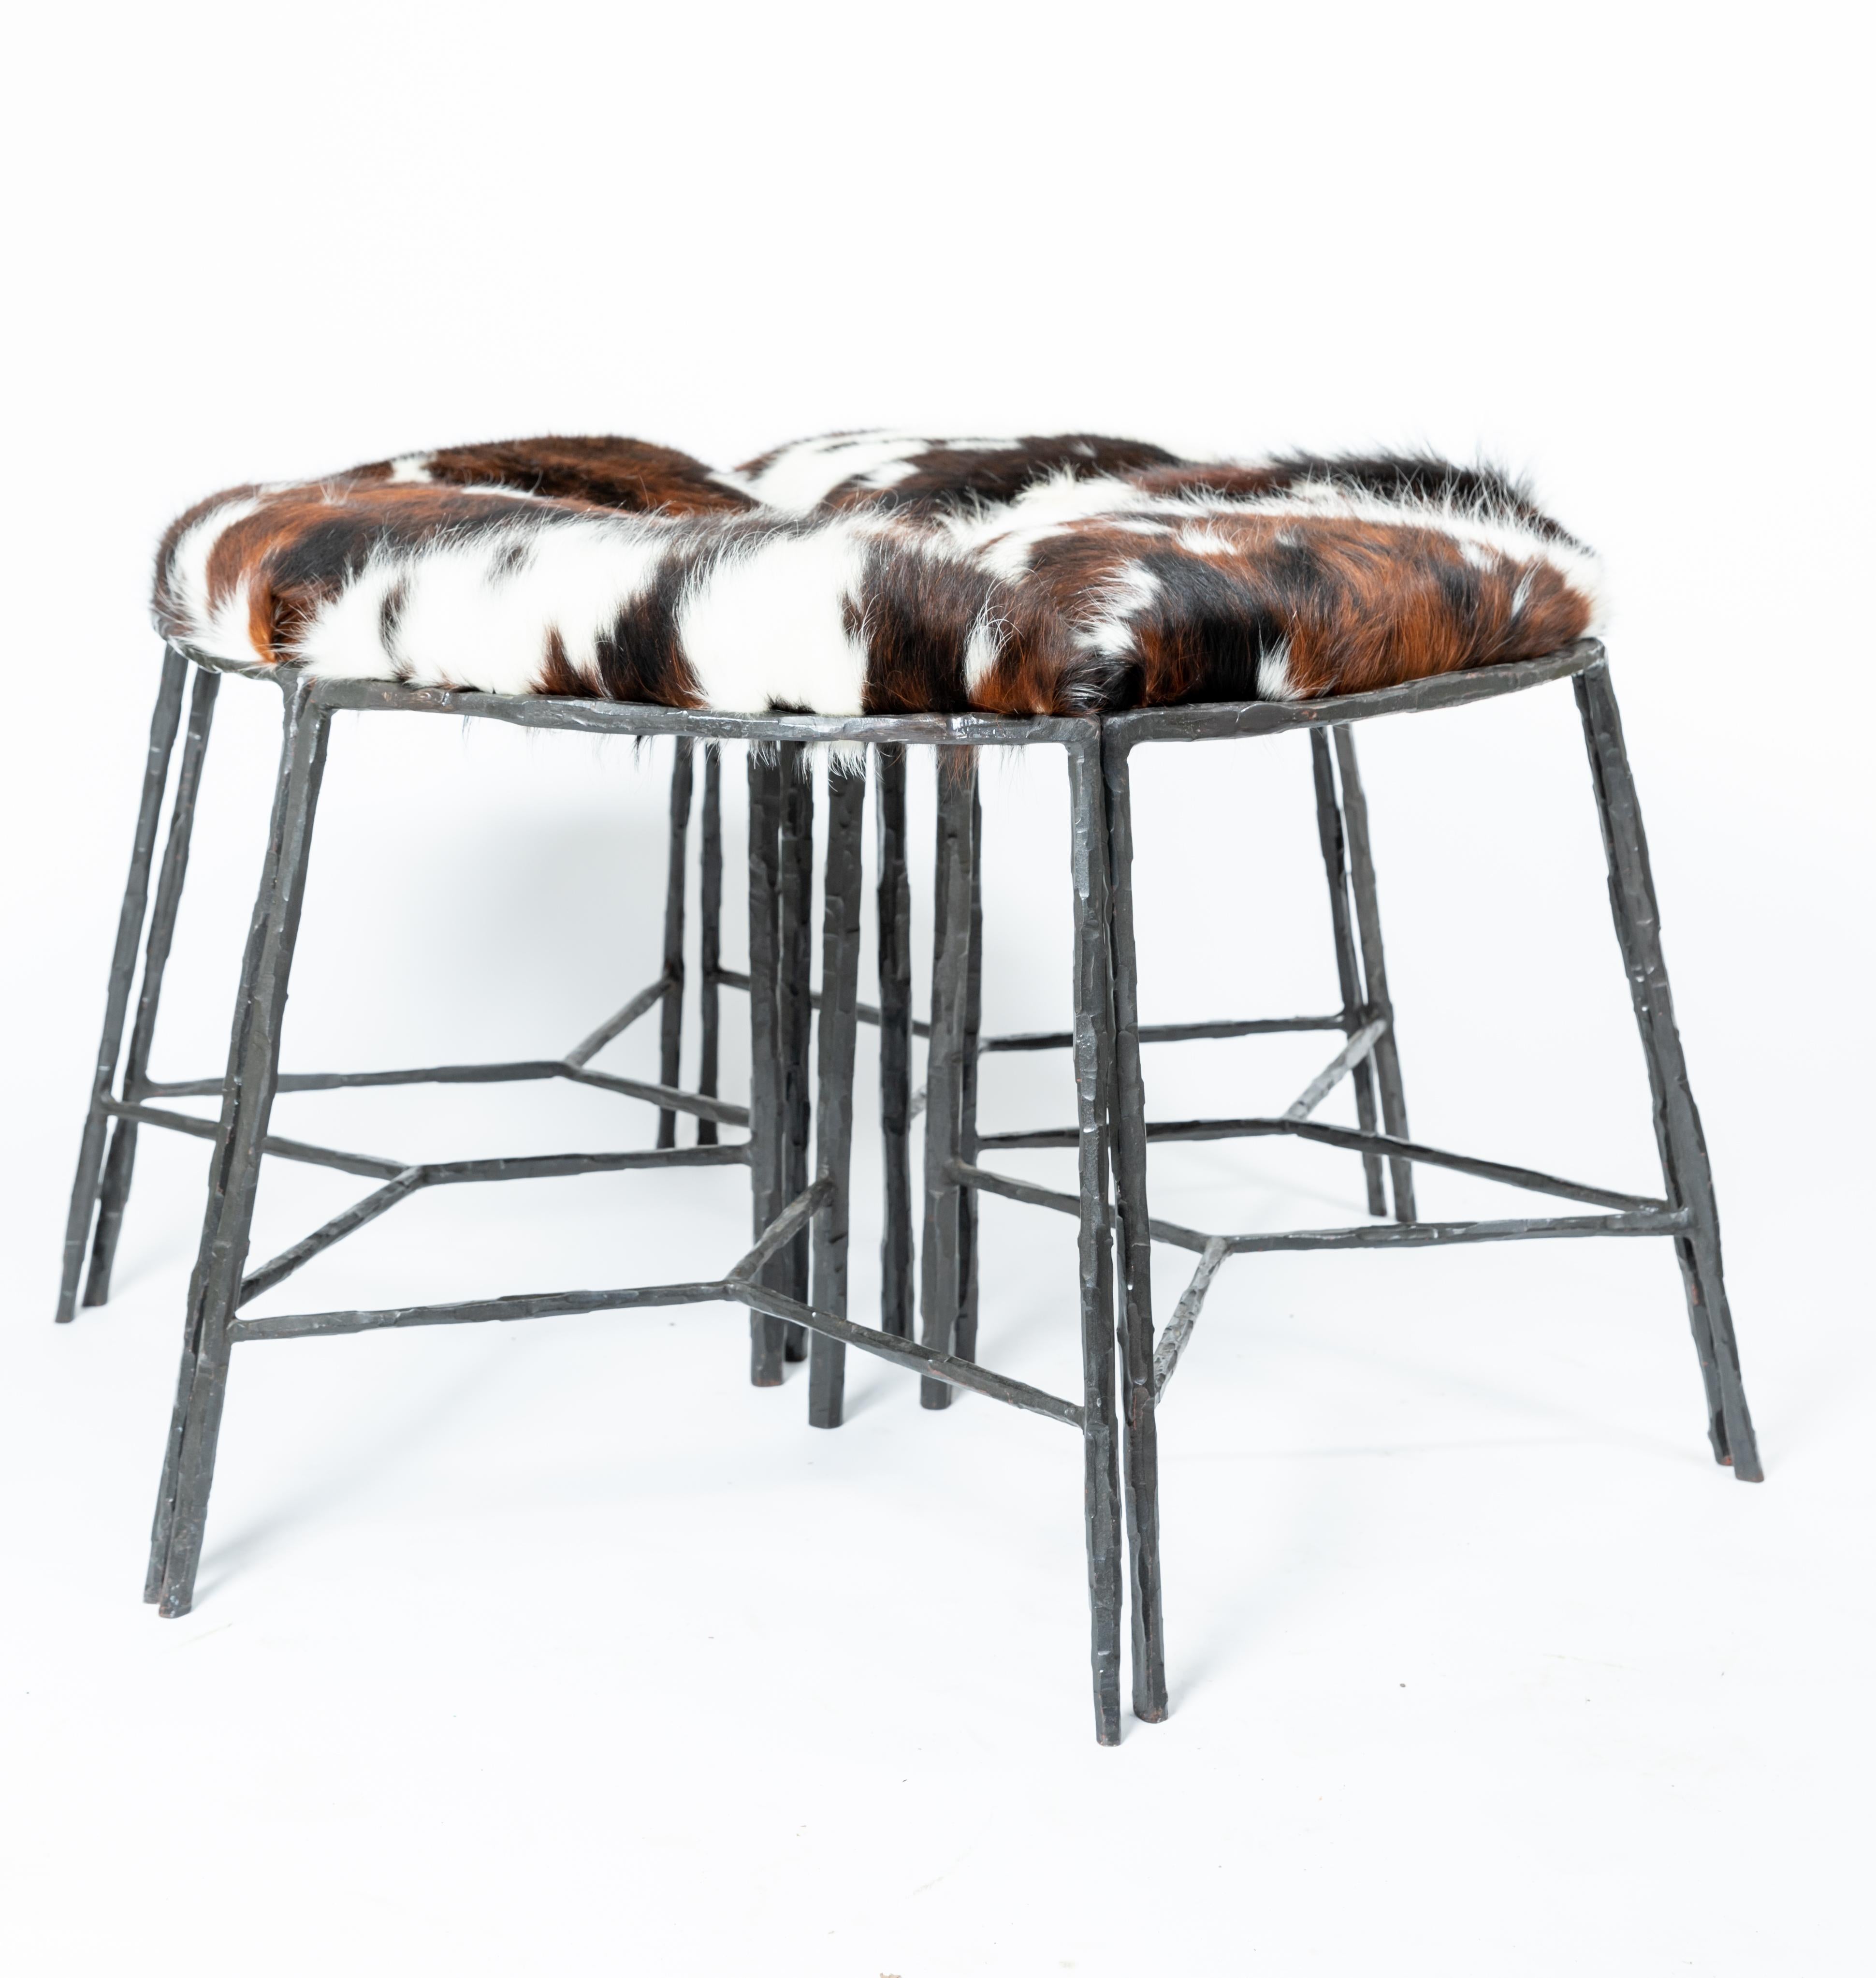 Italian Unusual Cluster of Six Pie Shaped Hide Upholstered Seat & Blackened Iron Benches